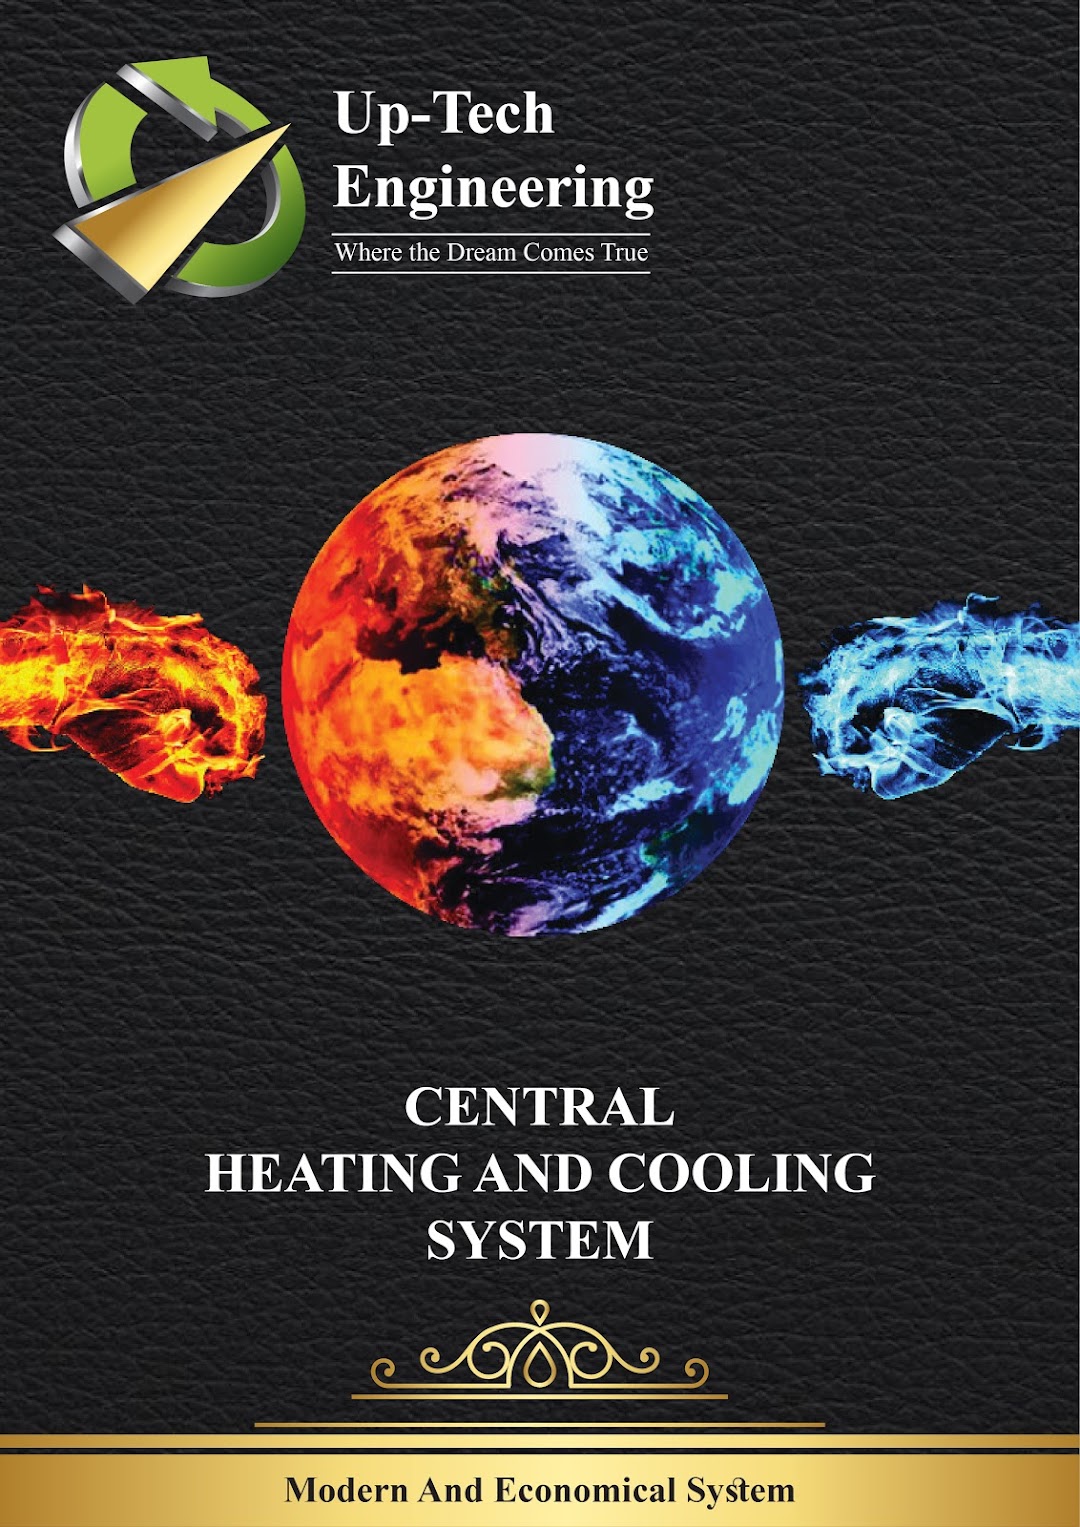 Central Heating & Cooling Services in Pakistan (Up-tech Engineering)